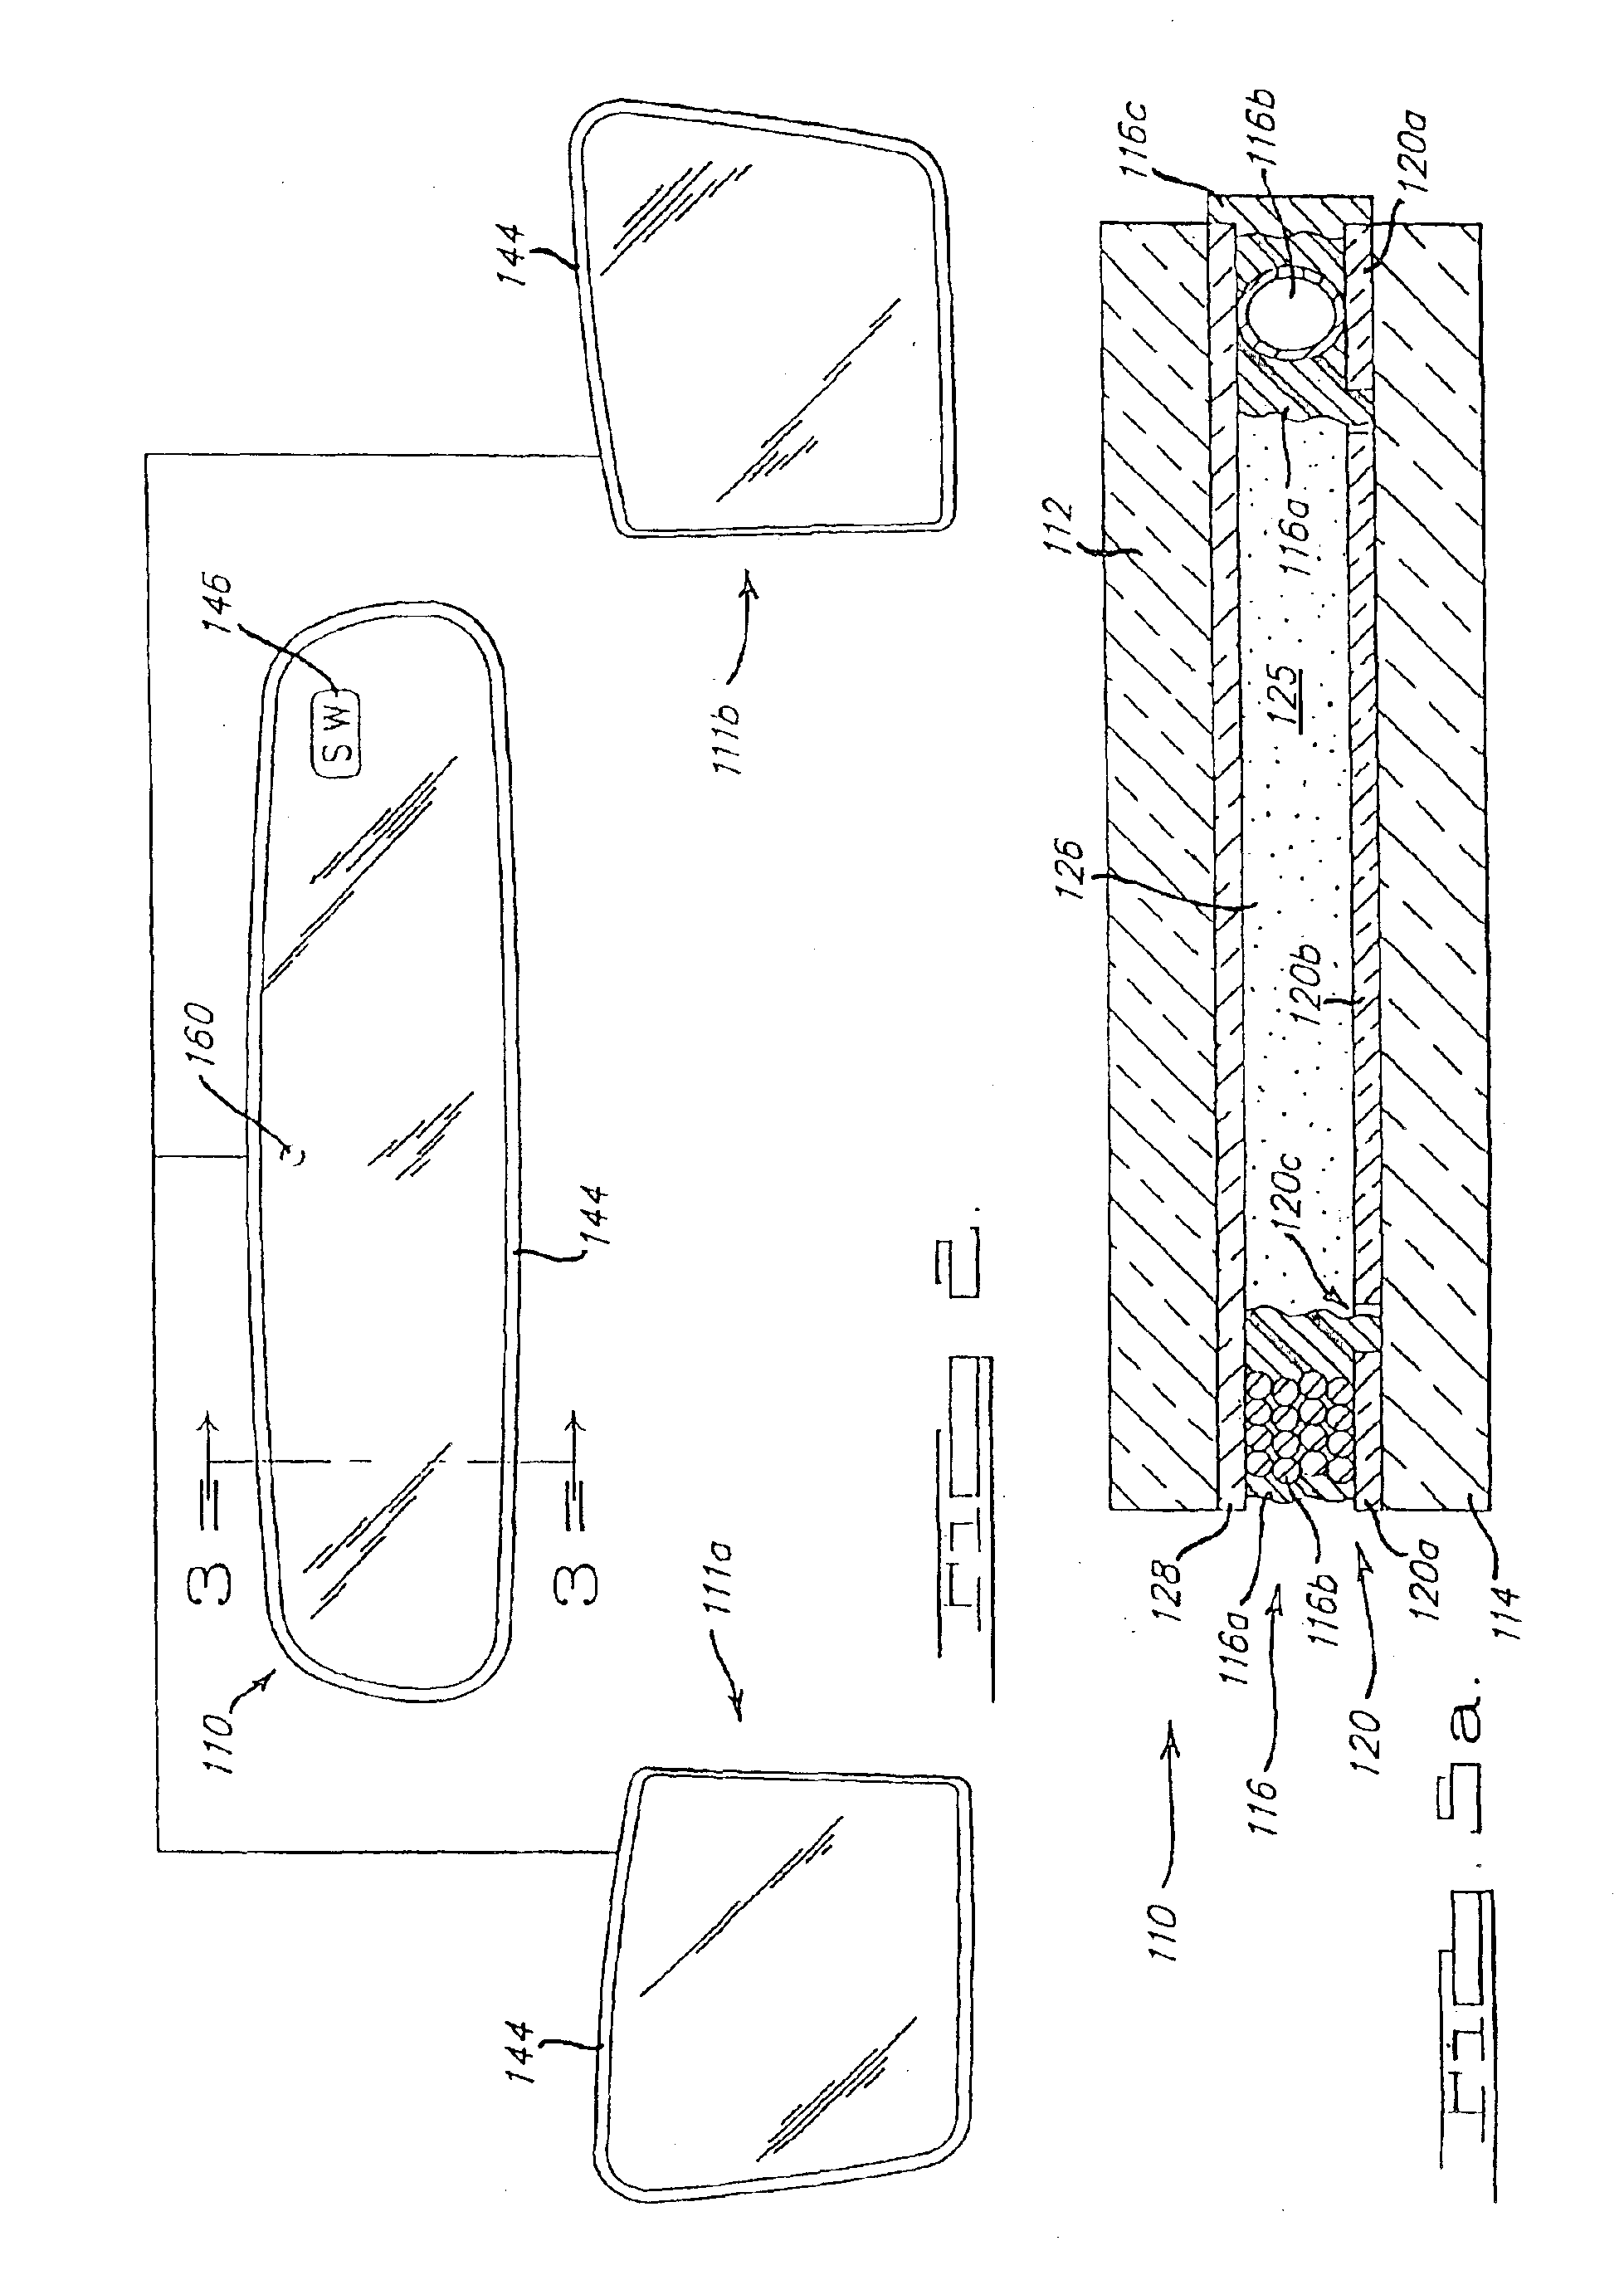 Electrochromic device having a seal including an epoxy resin cured with a cycloaliphatic amine